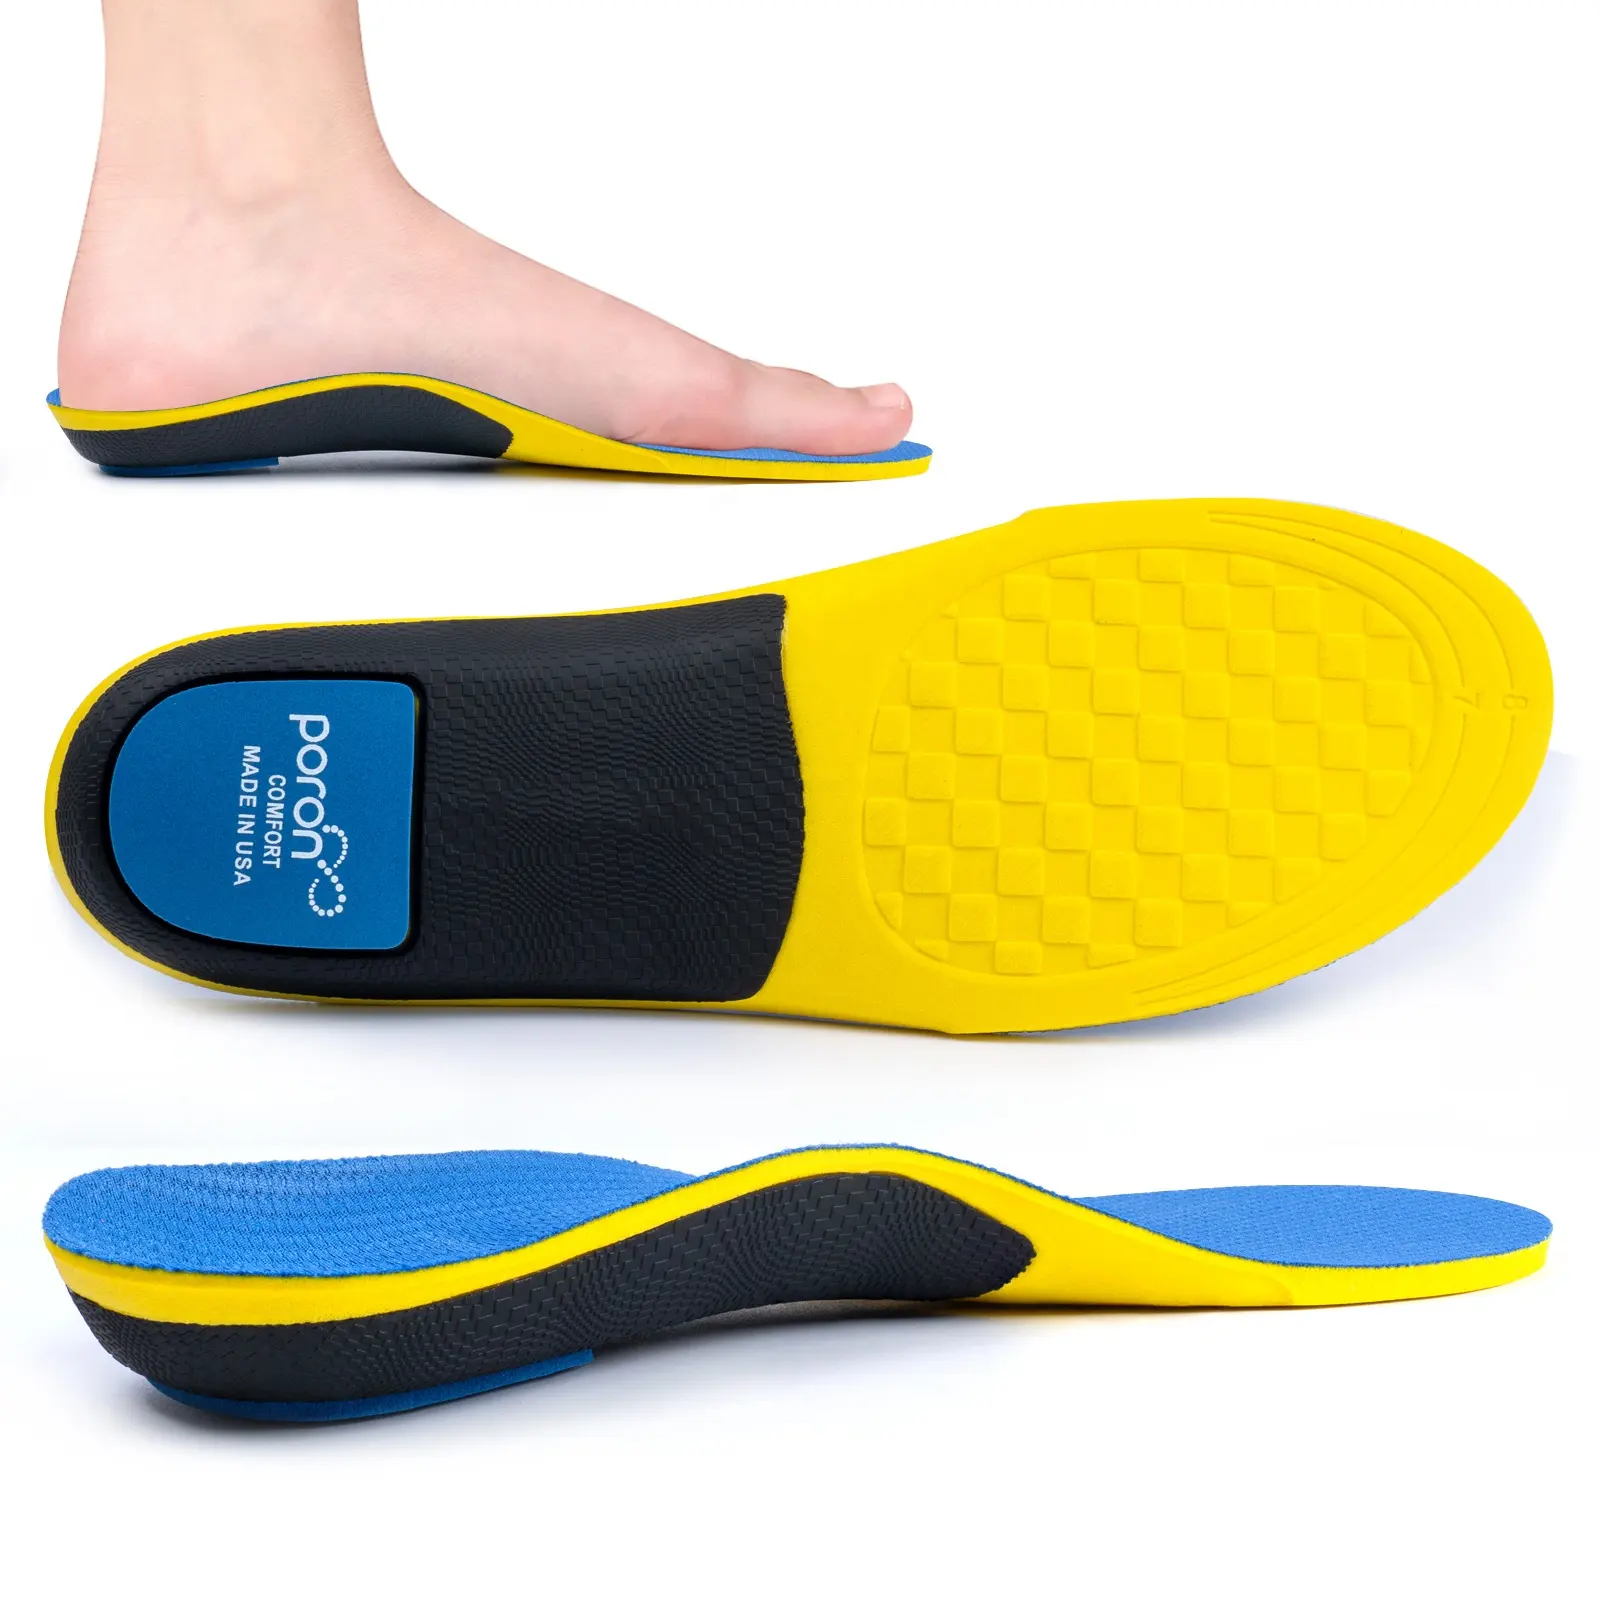 Arch support Orthotic Flat foot Memory Foam Insoles Plantar Fasciitis Sport Shock Absorption Running Comfort PU Insole